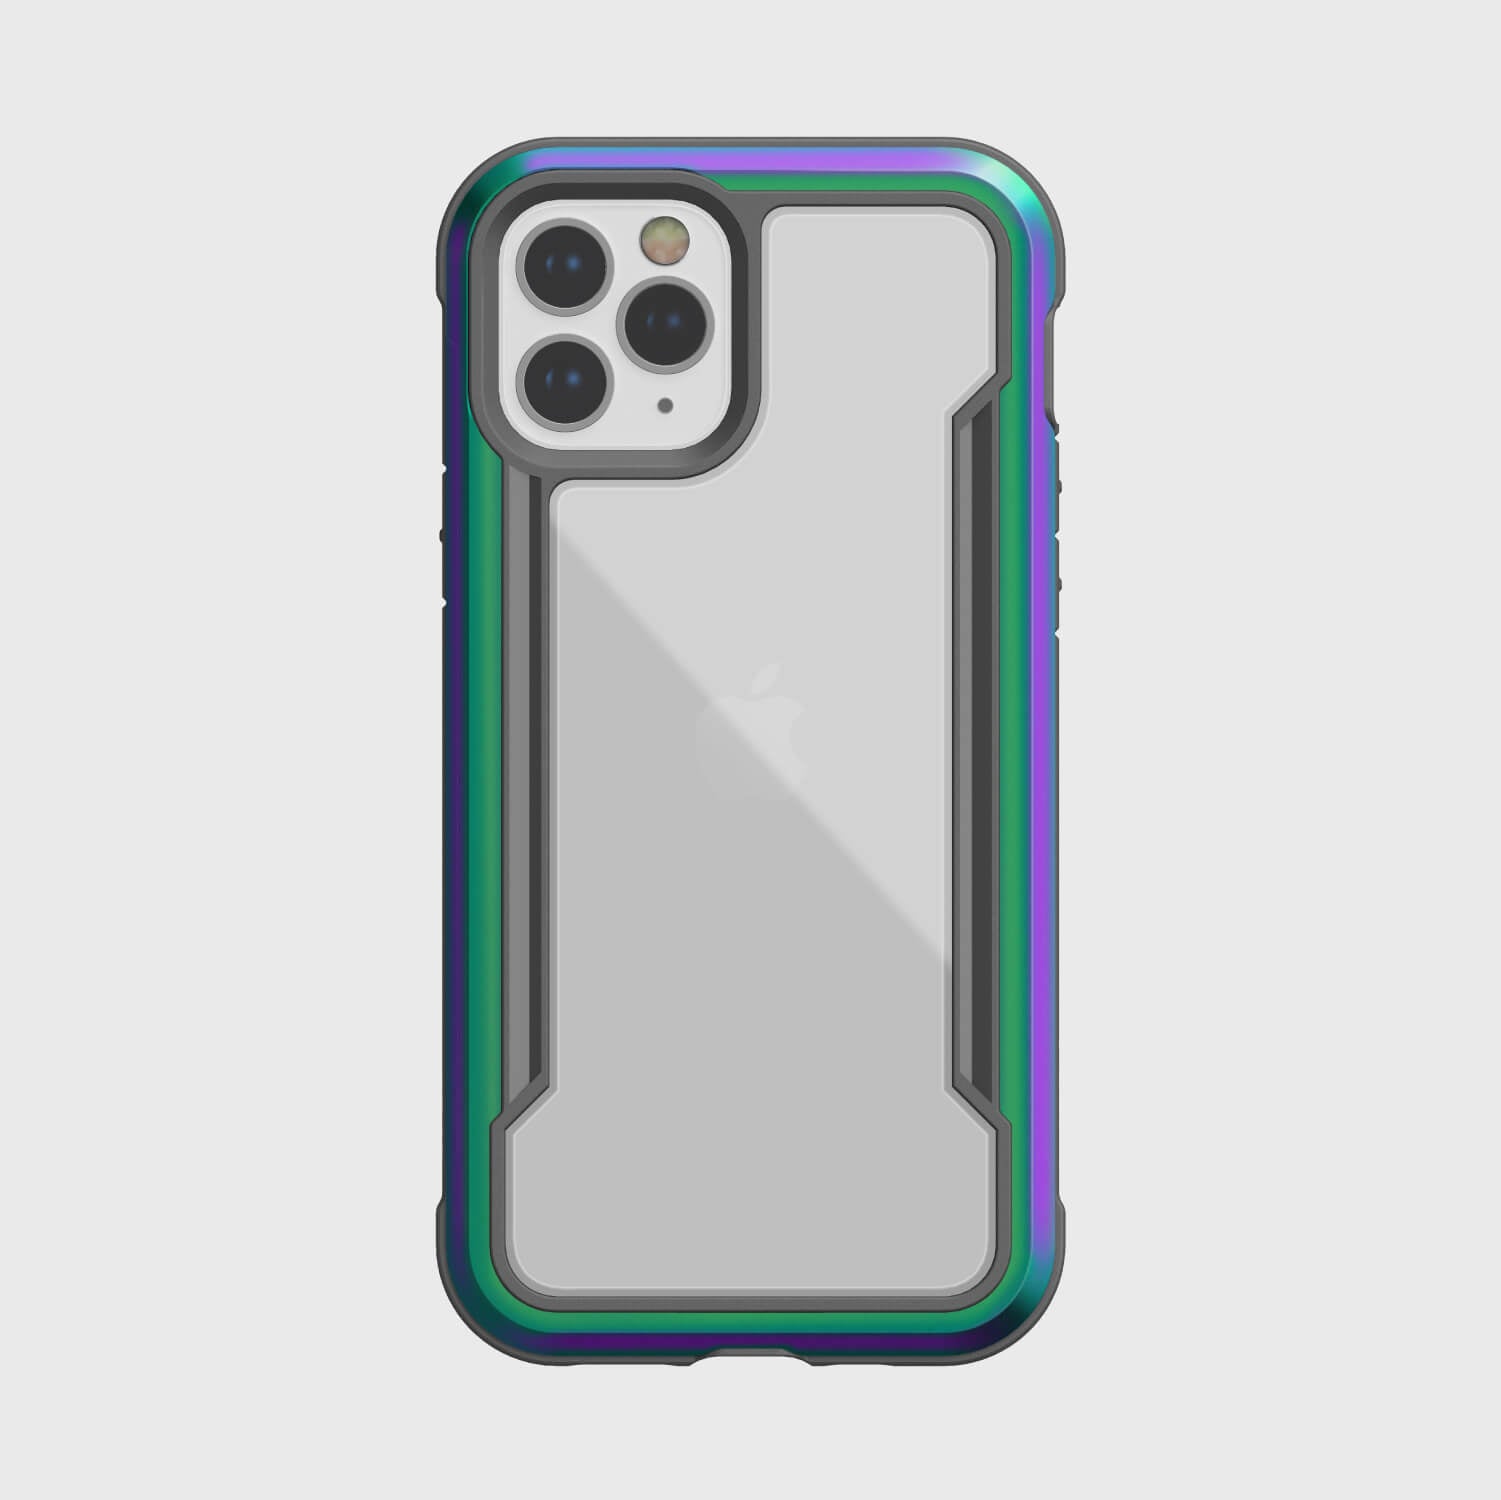 The back view of a Raptic SHIELD iPhone 12 Pro case in purple, green, and blue, providing protection for your iPhone 12.